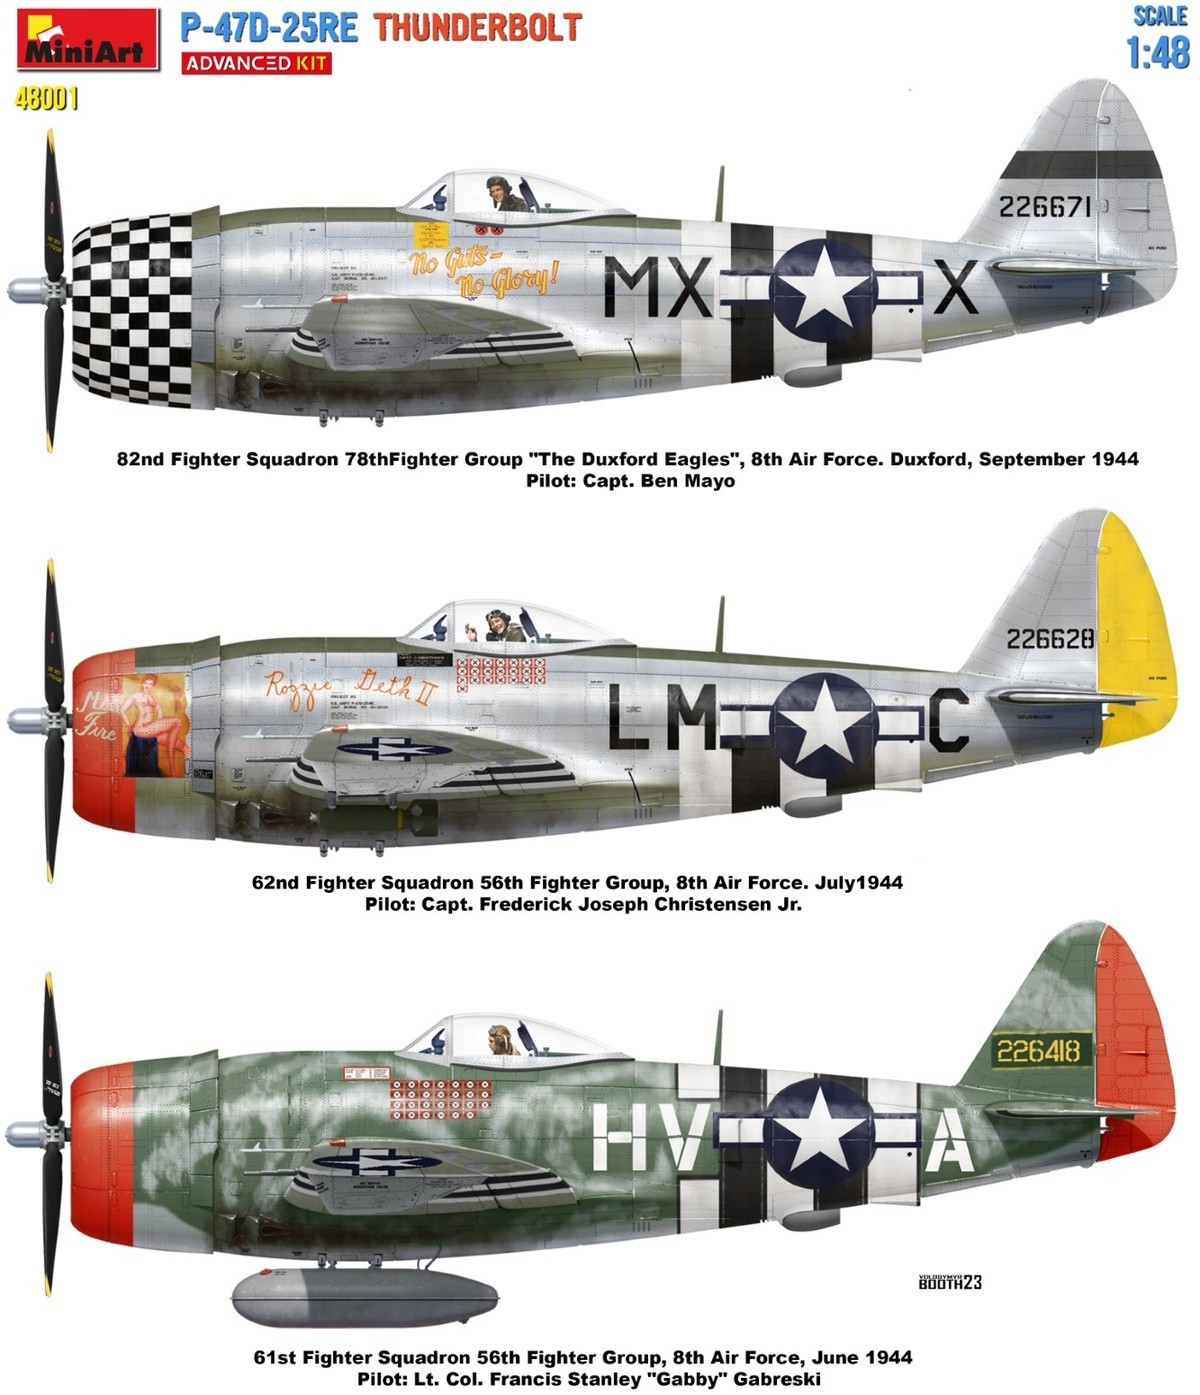 MiniArt to Release Highly Detailed 1:48 Scale P-47D-25RE Thunderbolt Advanced Kit Painting and Marking